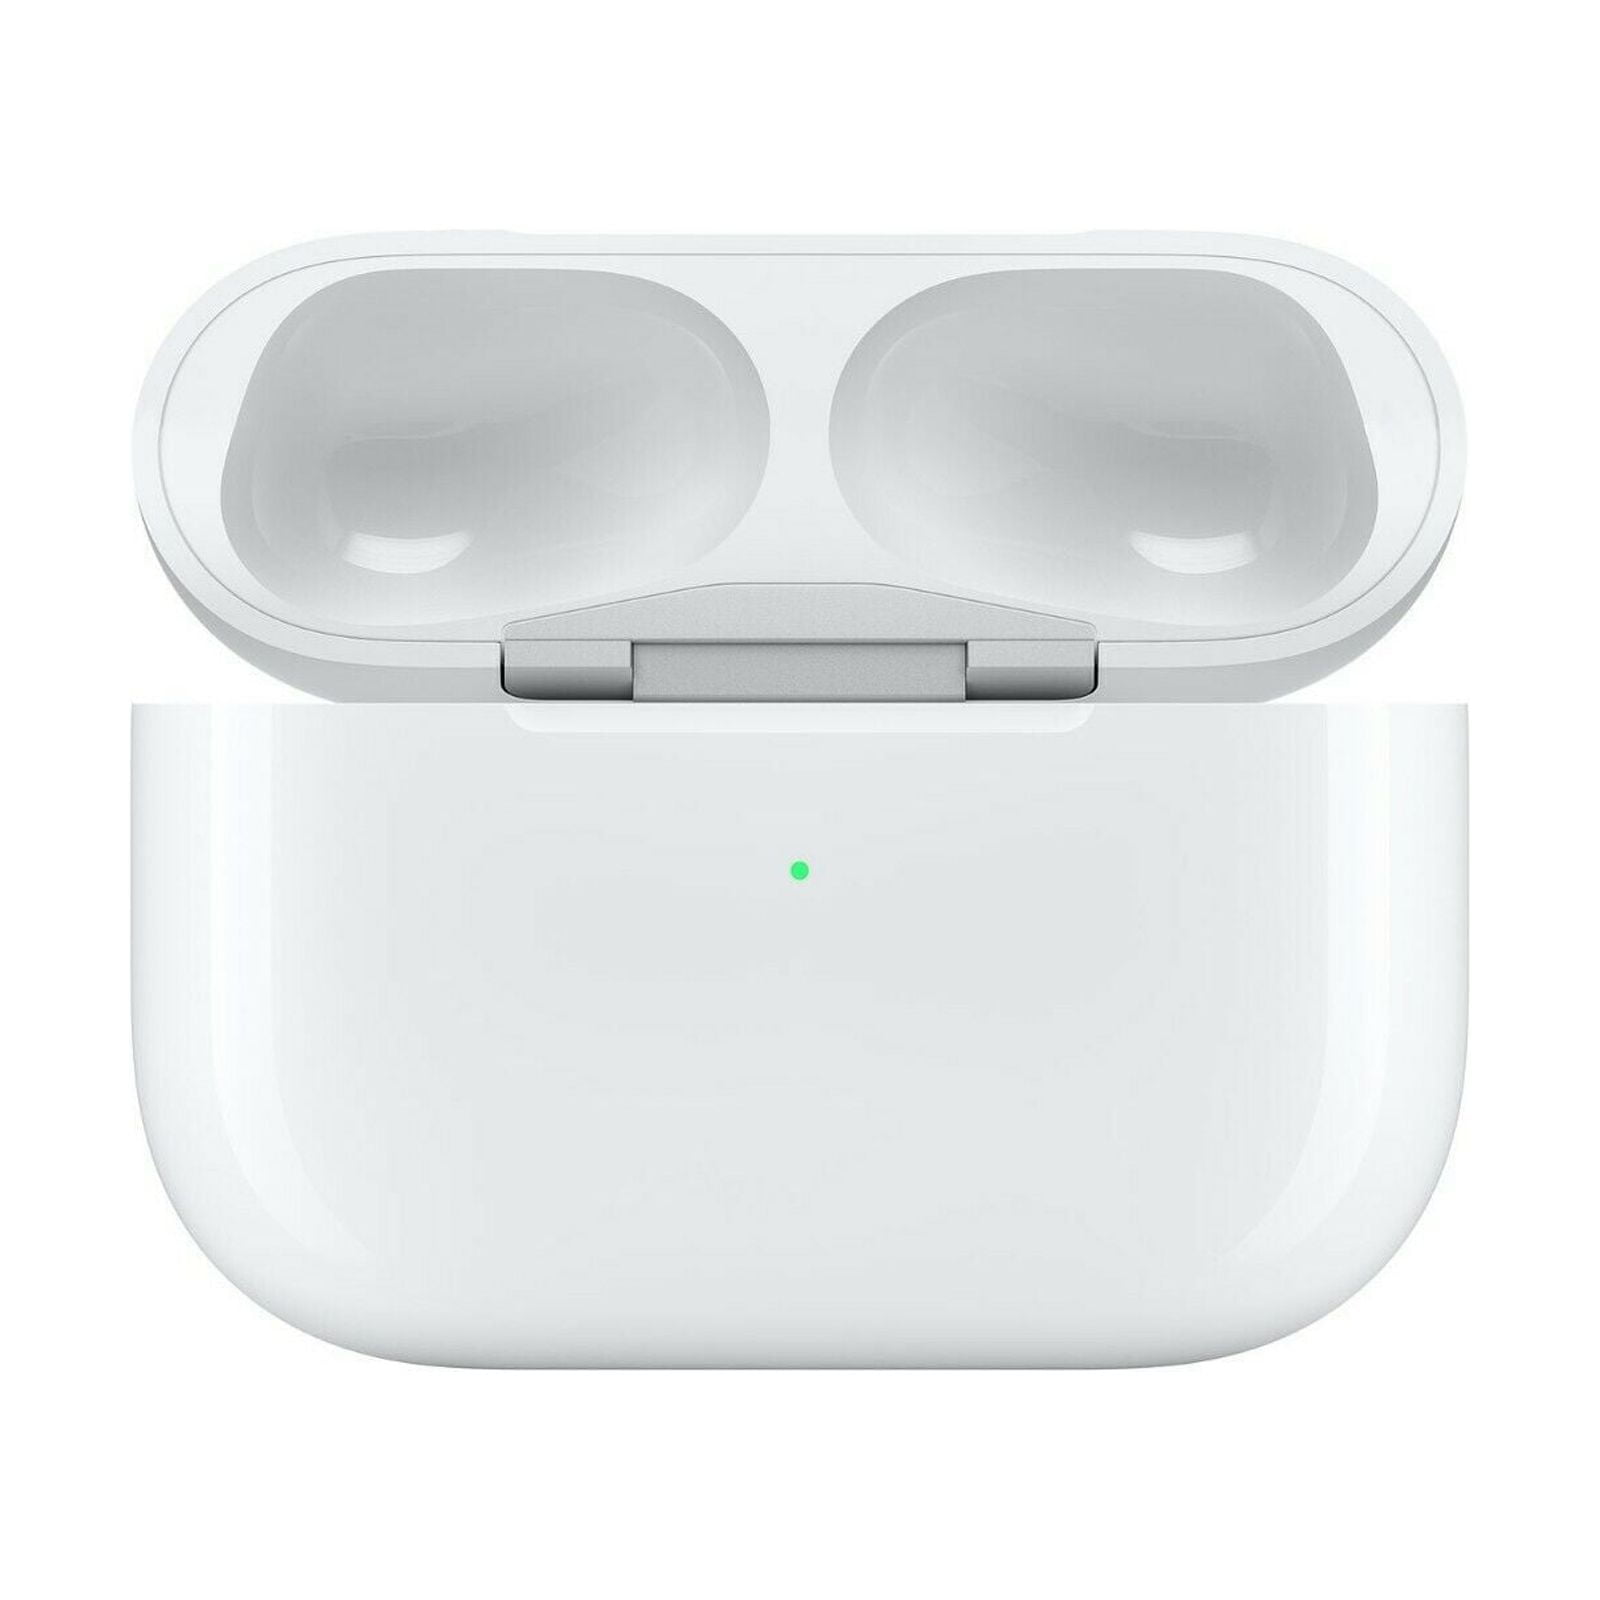 Refurbished Apple Charging Case Replacement for AirPods Pro (Case Only), White